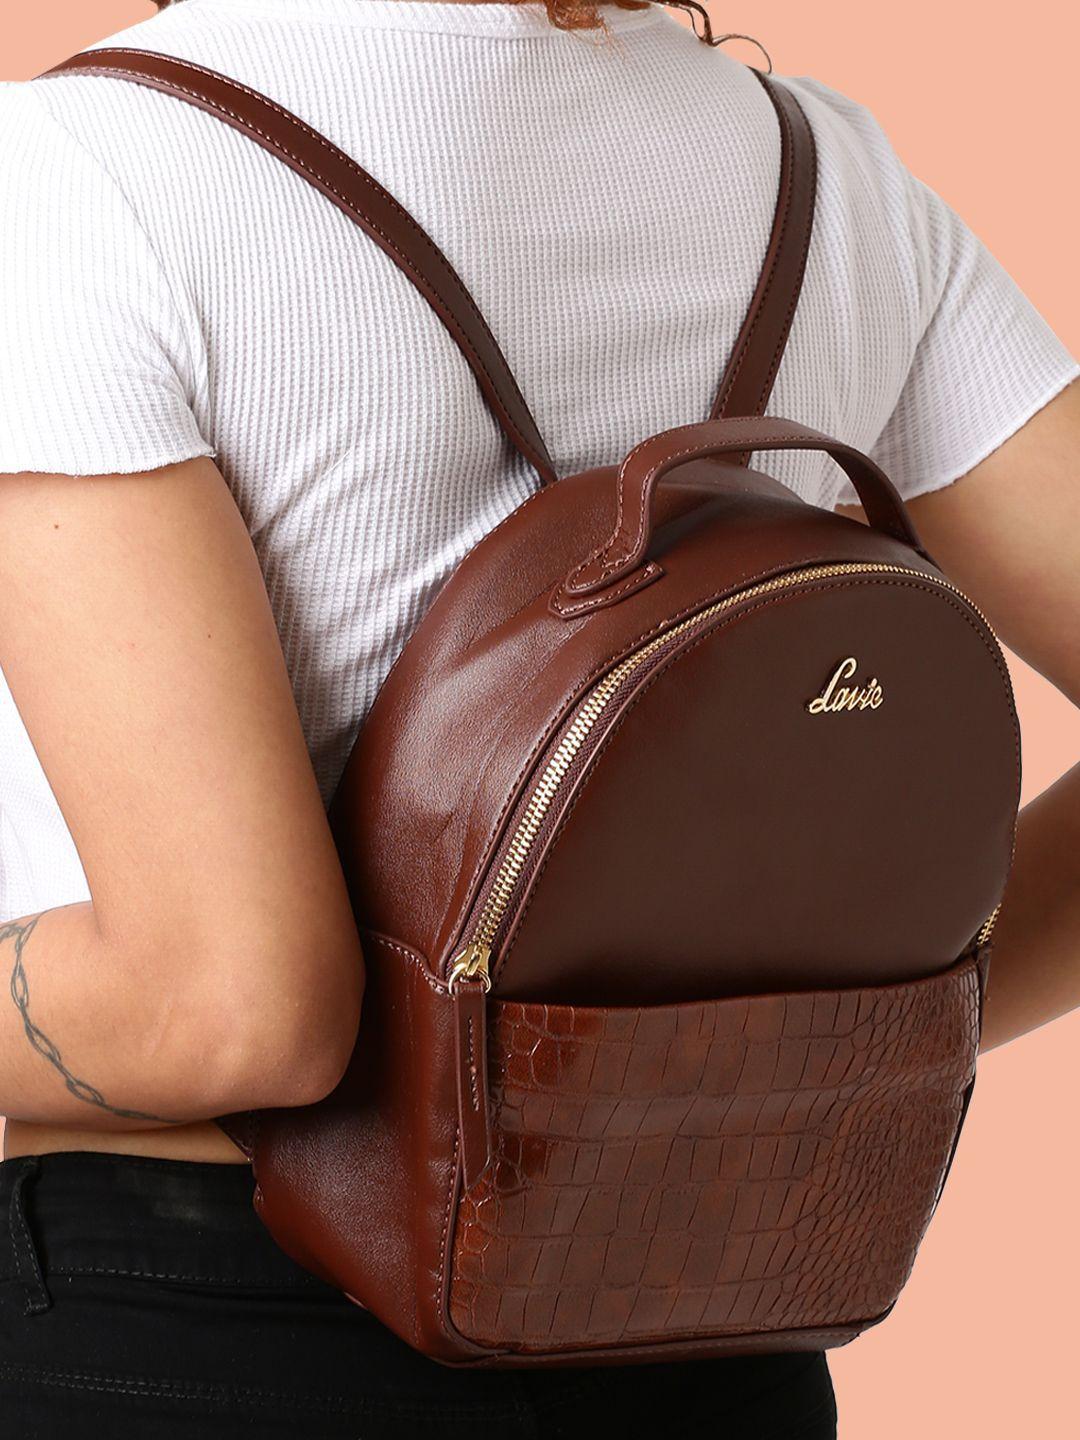 lavie-beetle-girls-brown-solid-stylish-small-backpack